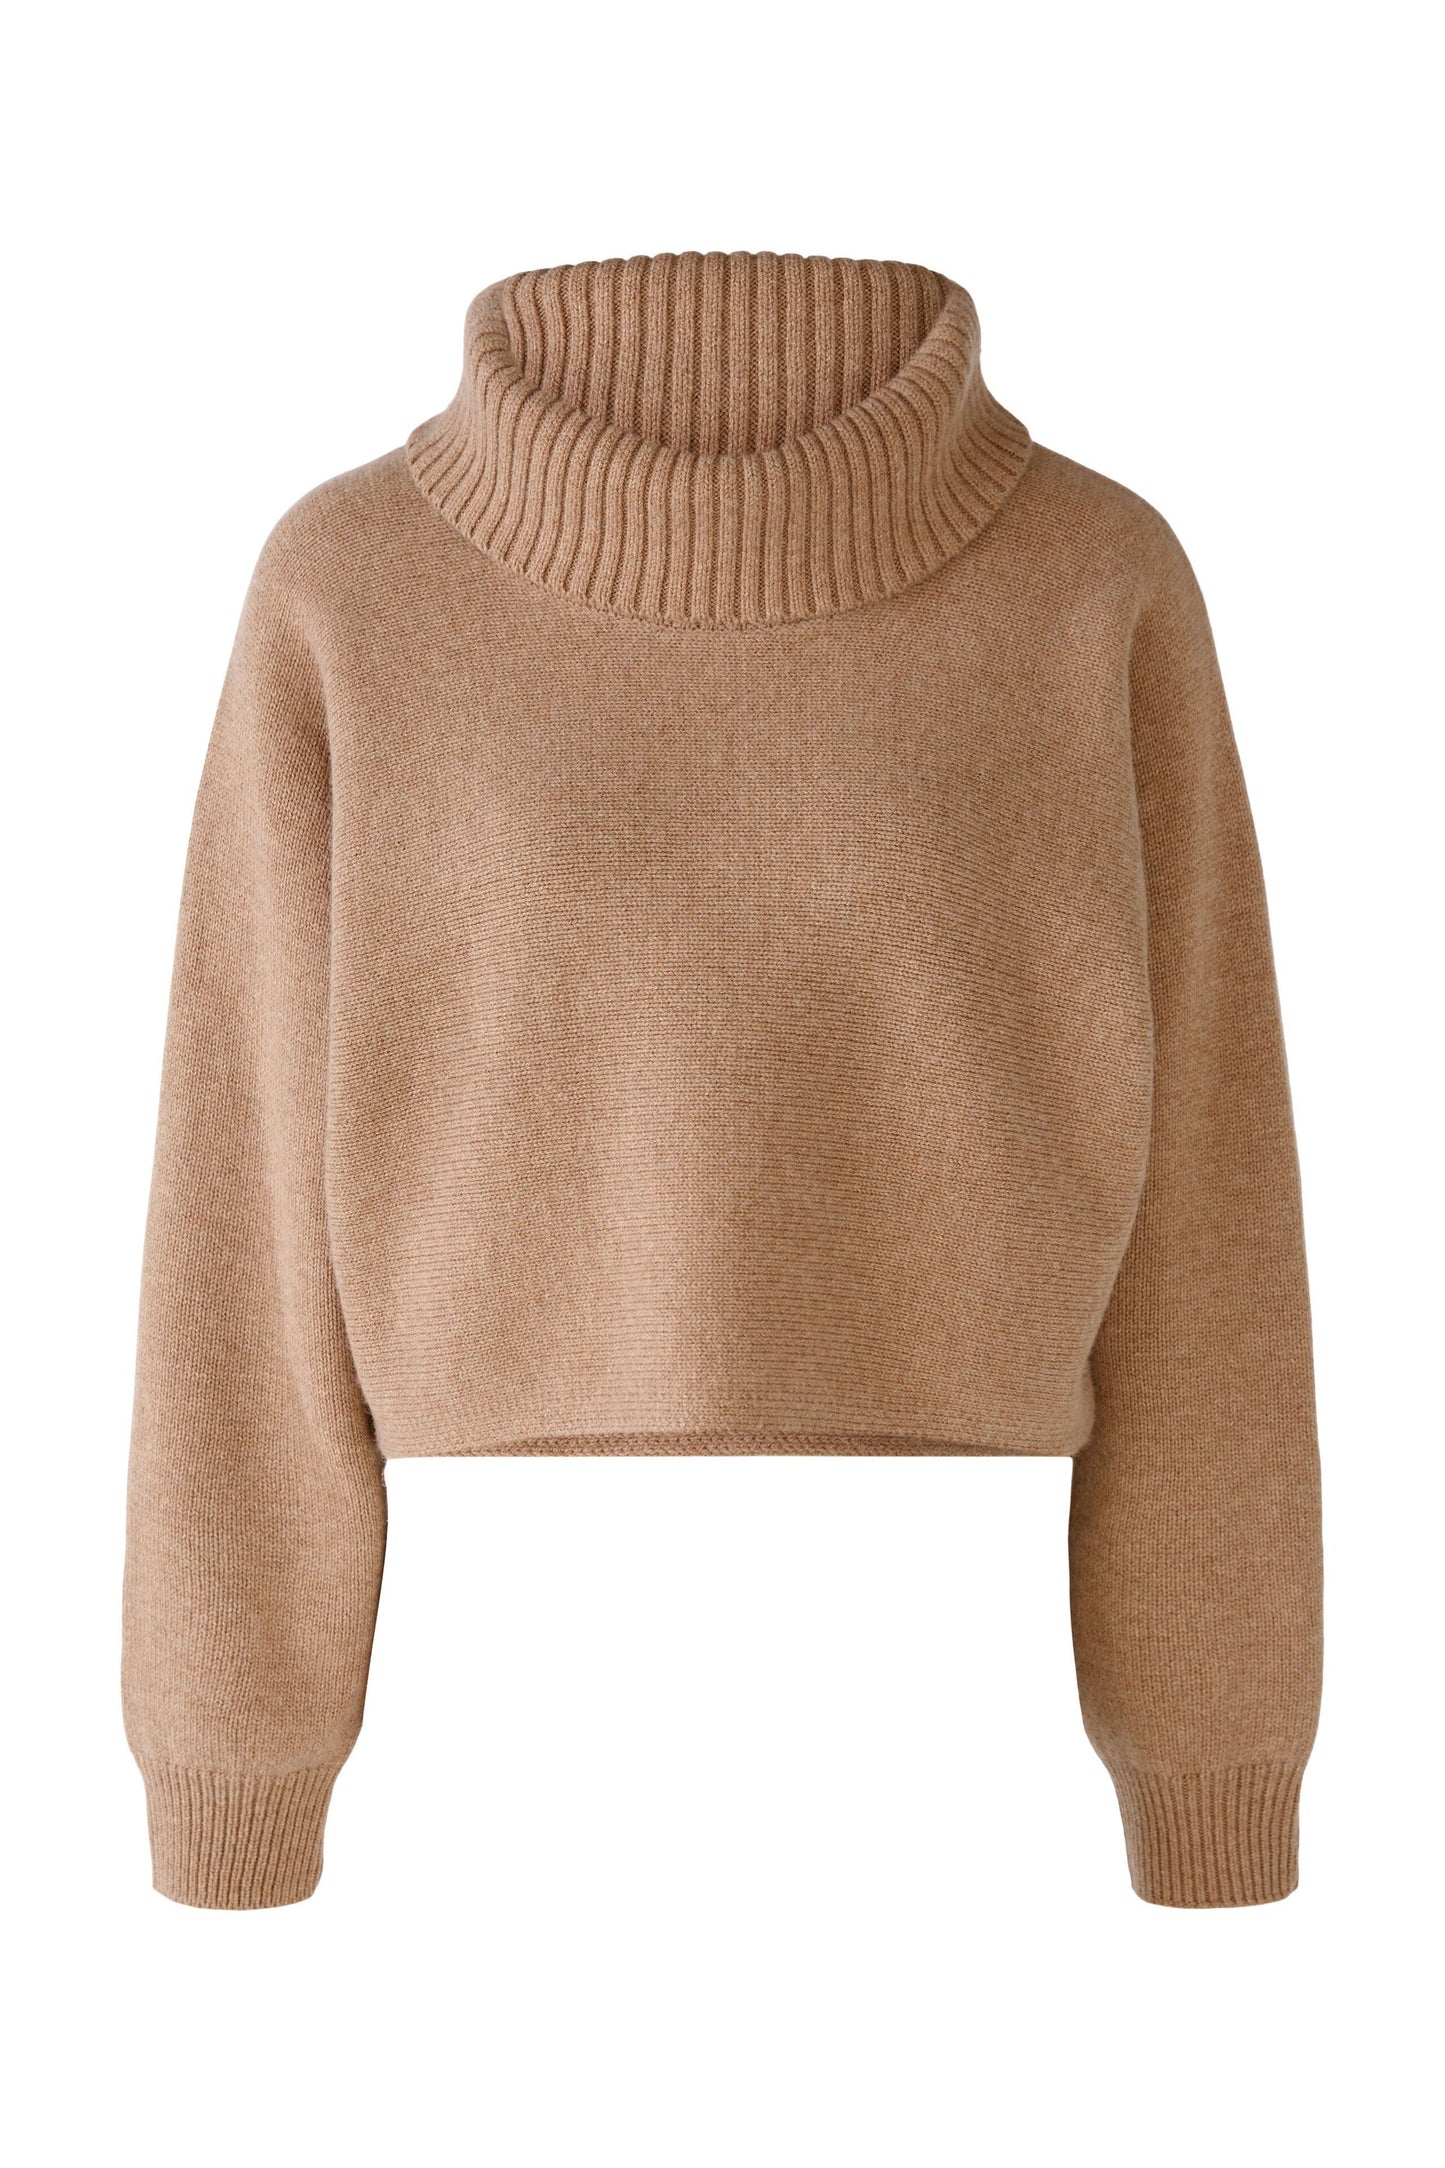 Pullover Wollmischung (Camel)